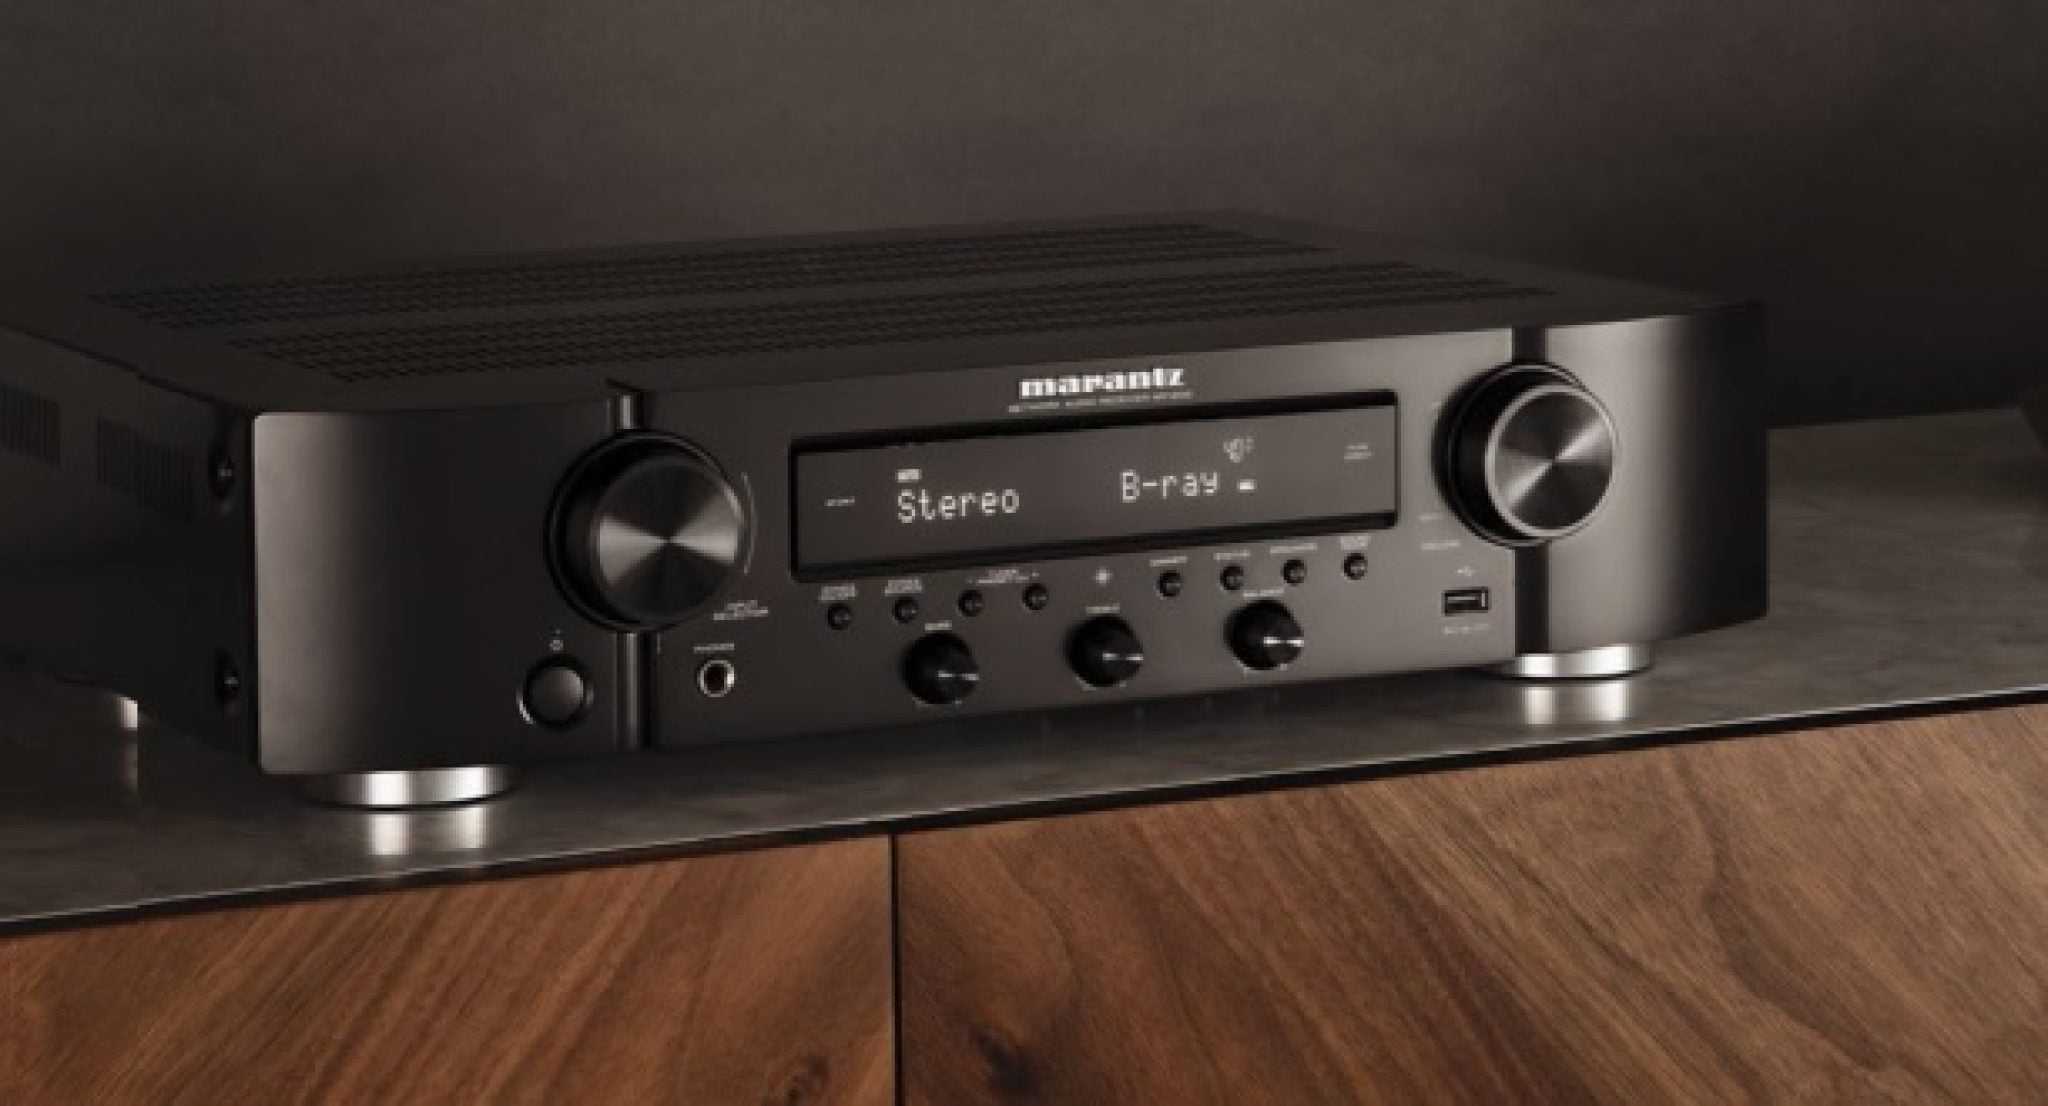 Review: marantz nr1200 stereo receiver – good stereo performance and hdmi